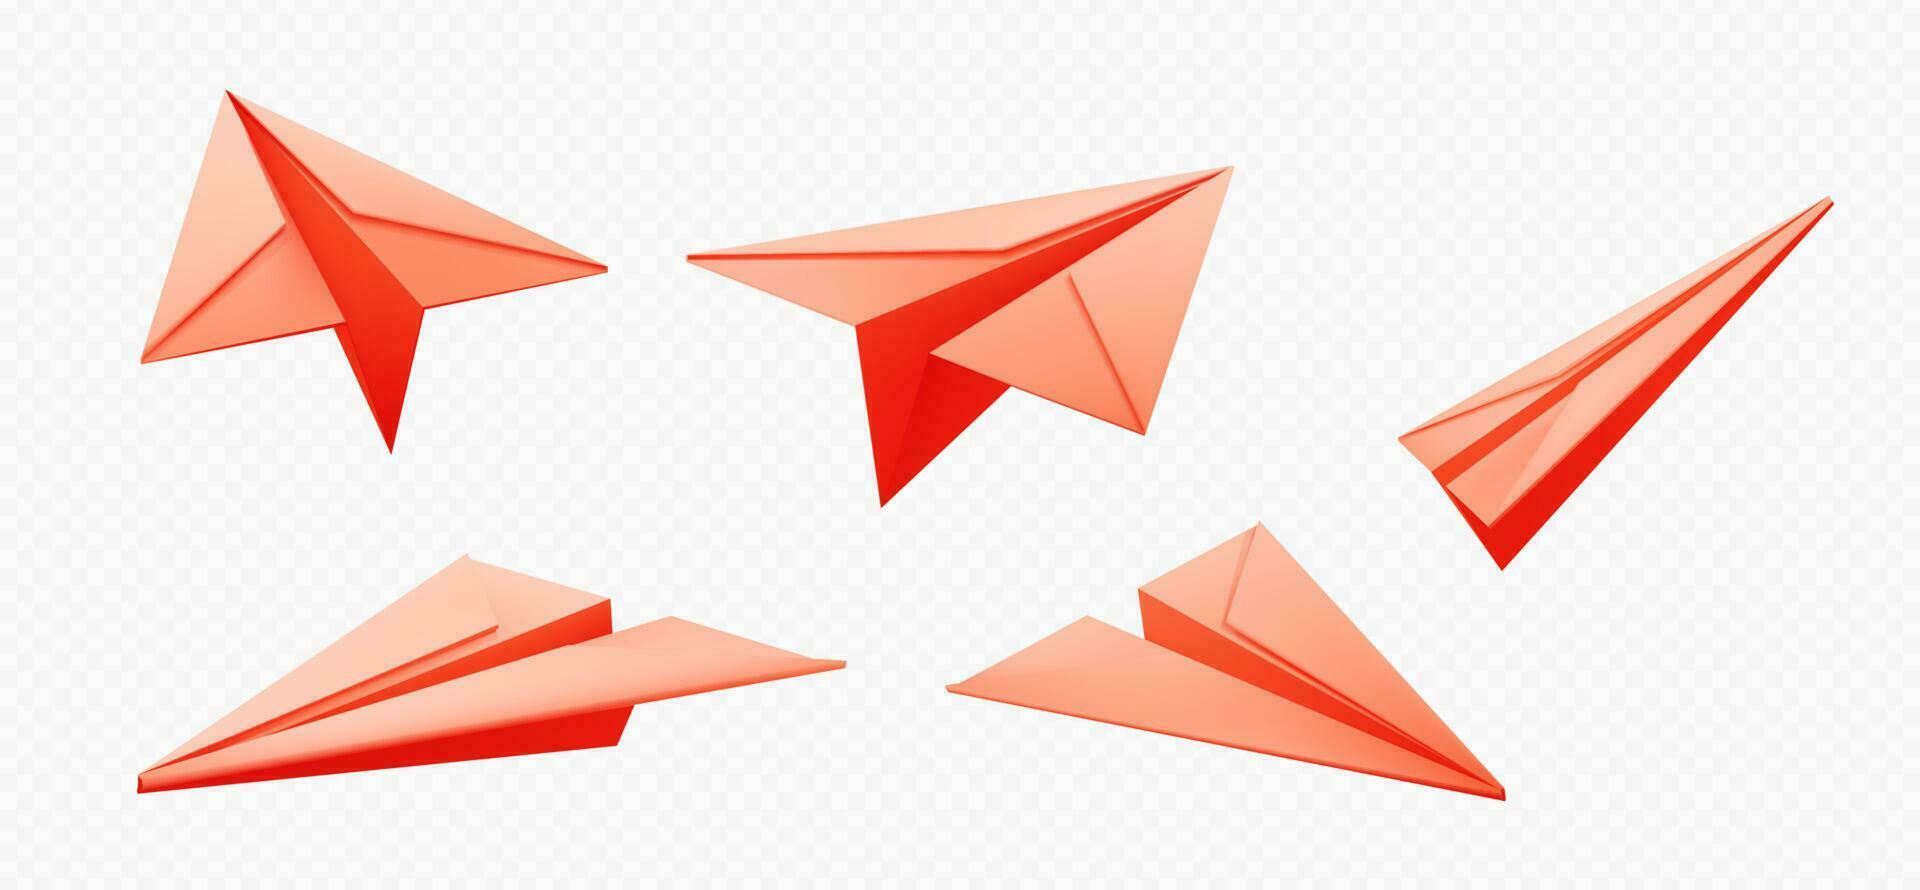 Icons of paper plane flying in air. 3d origami vector